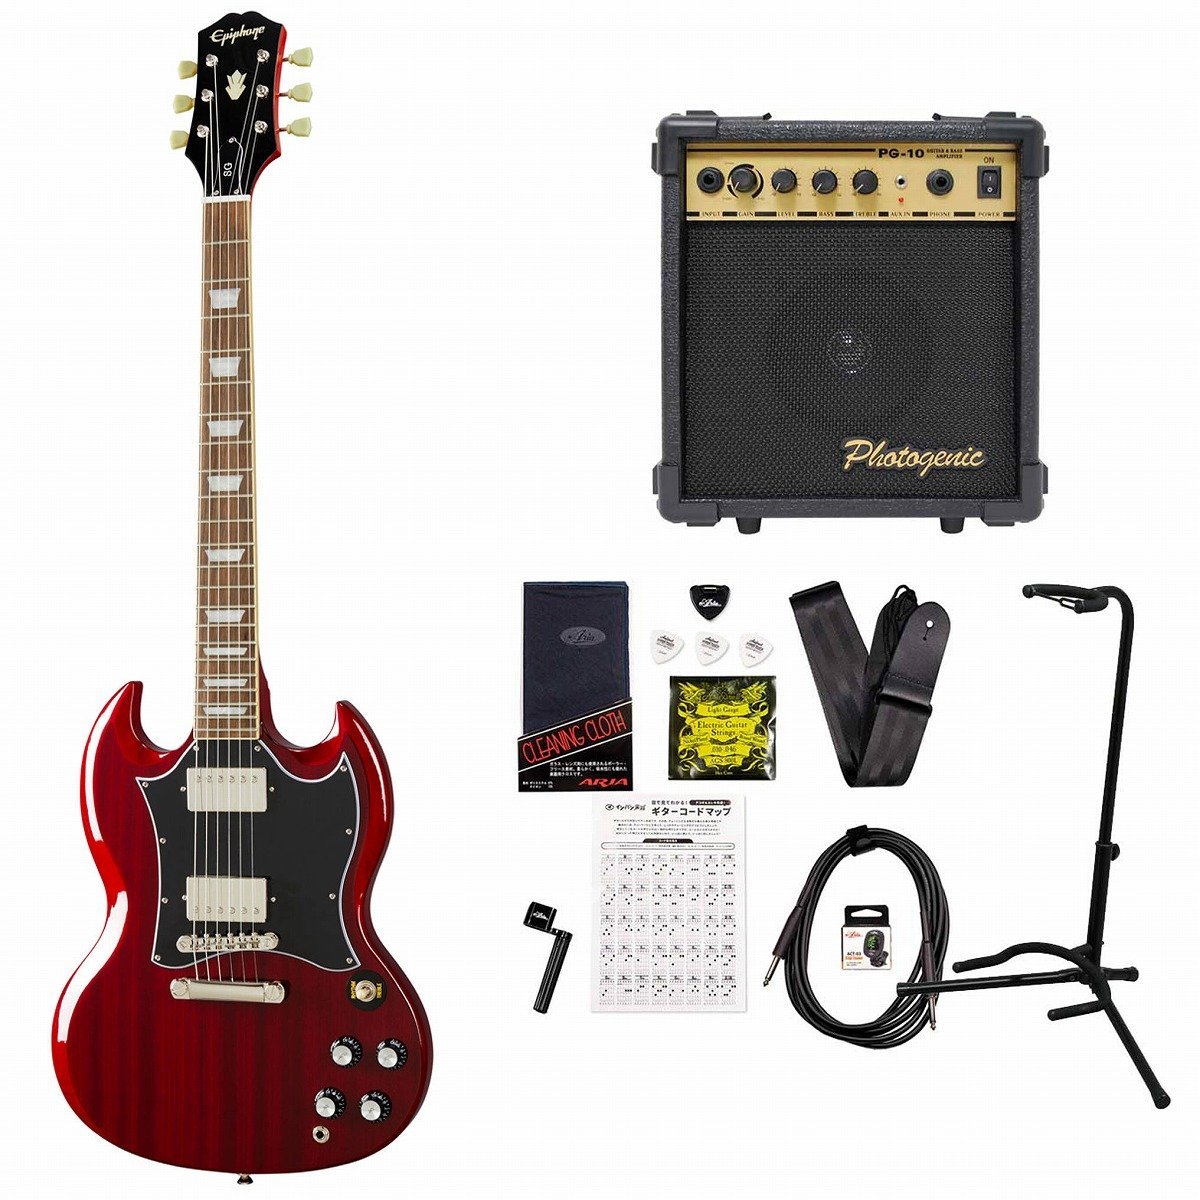 Epiphone Inspired by Gibson SG Standard Heritage Cherry エピフォン